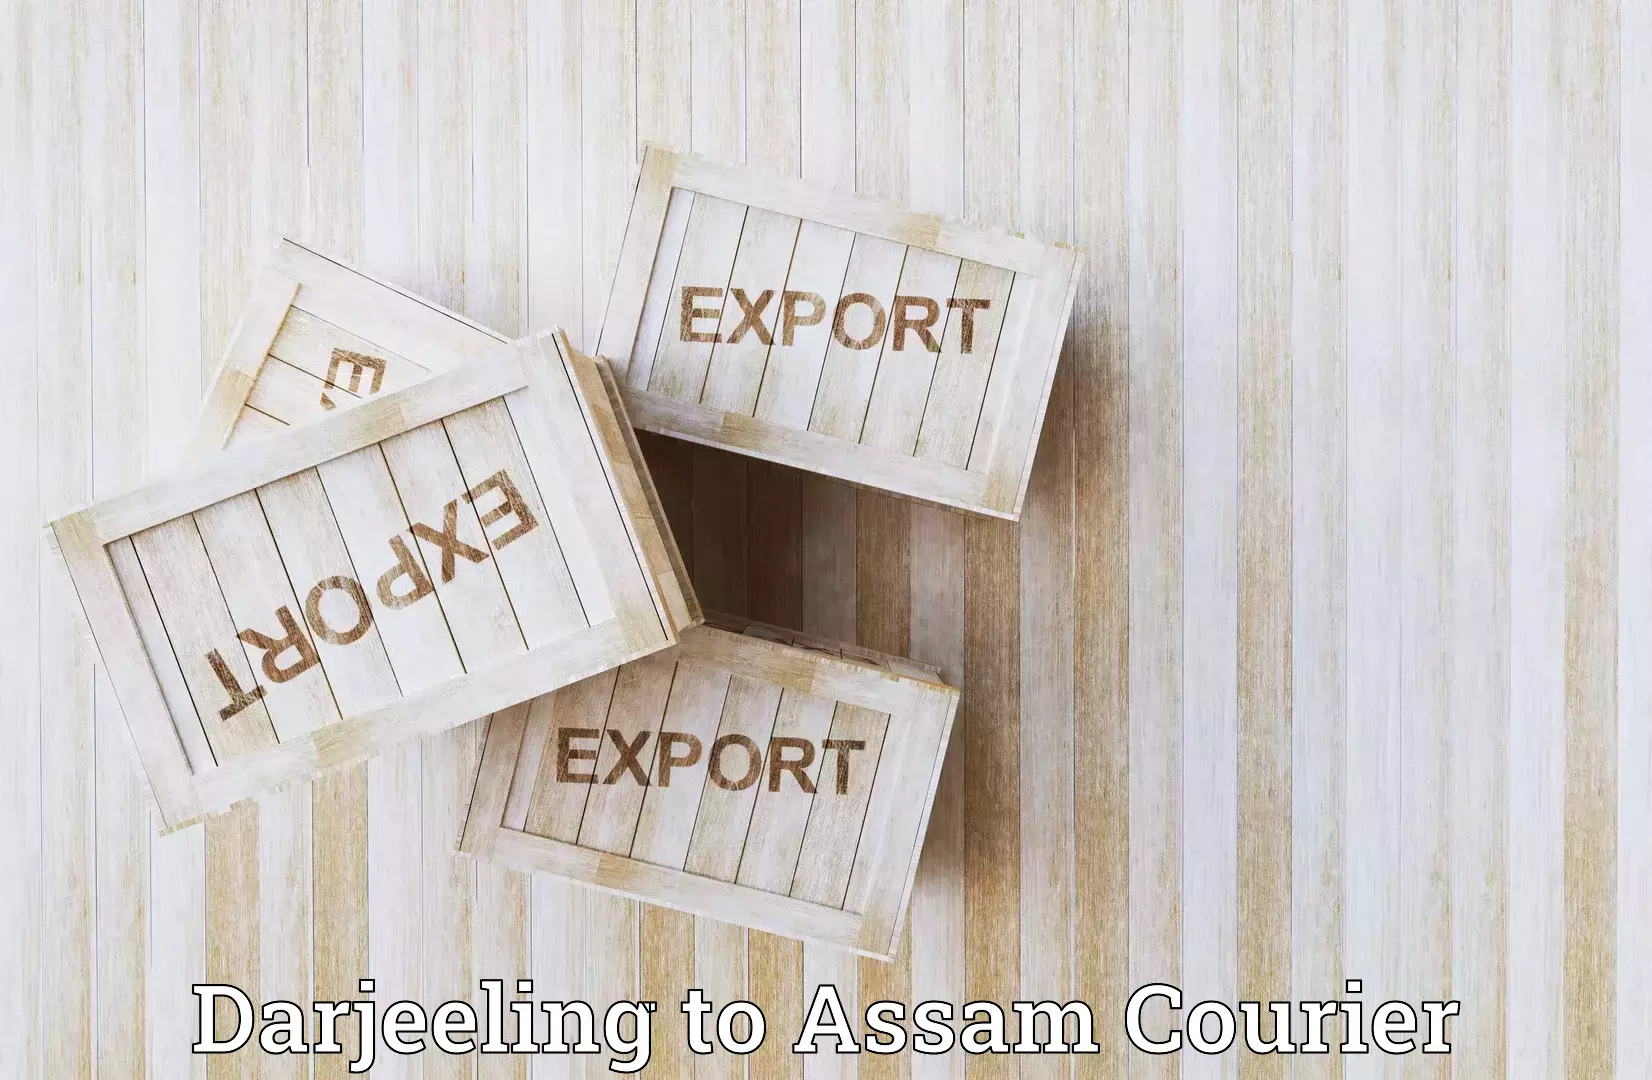 Seamless shipping experience Darjeeling to Assam